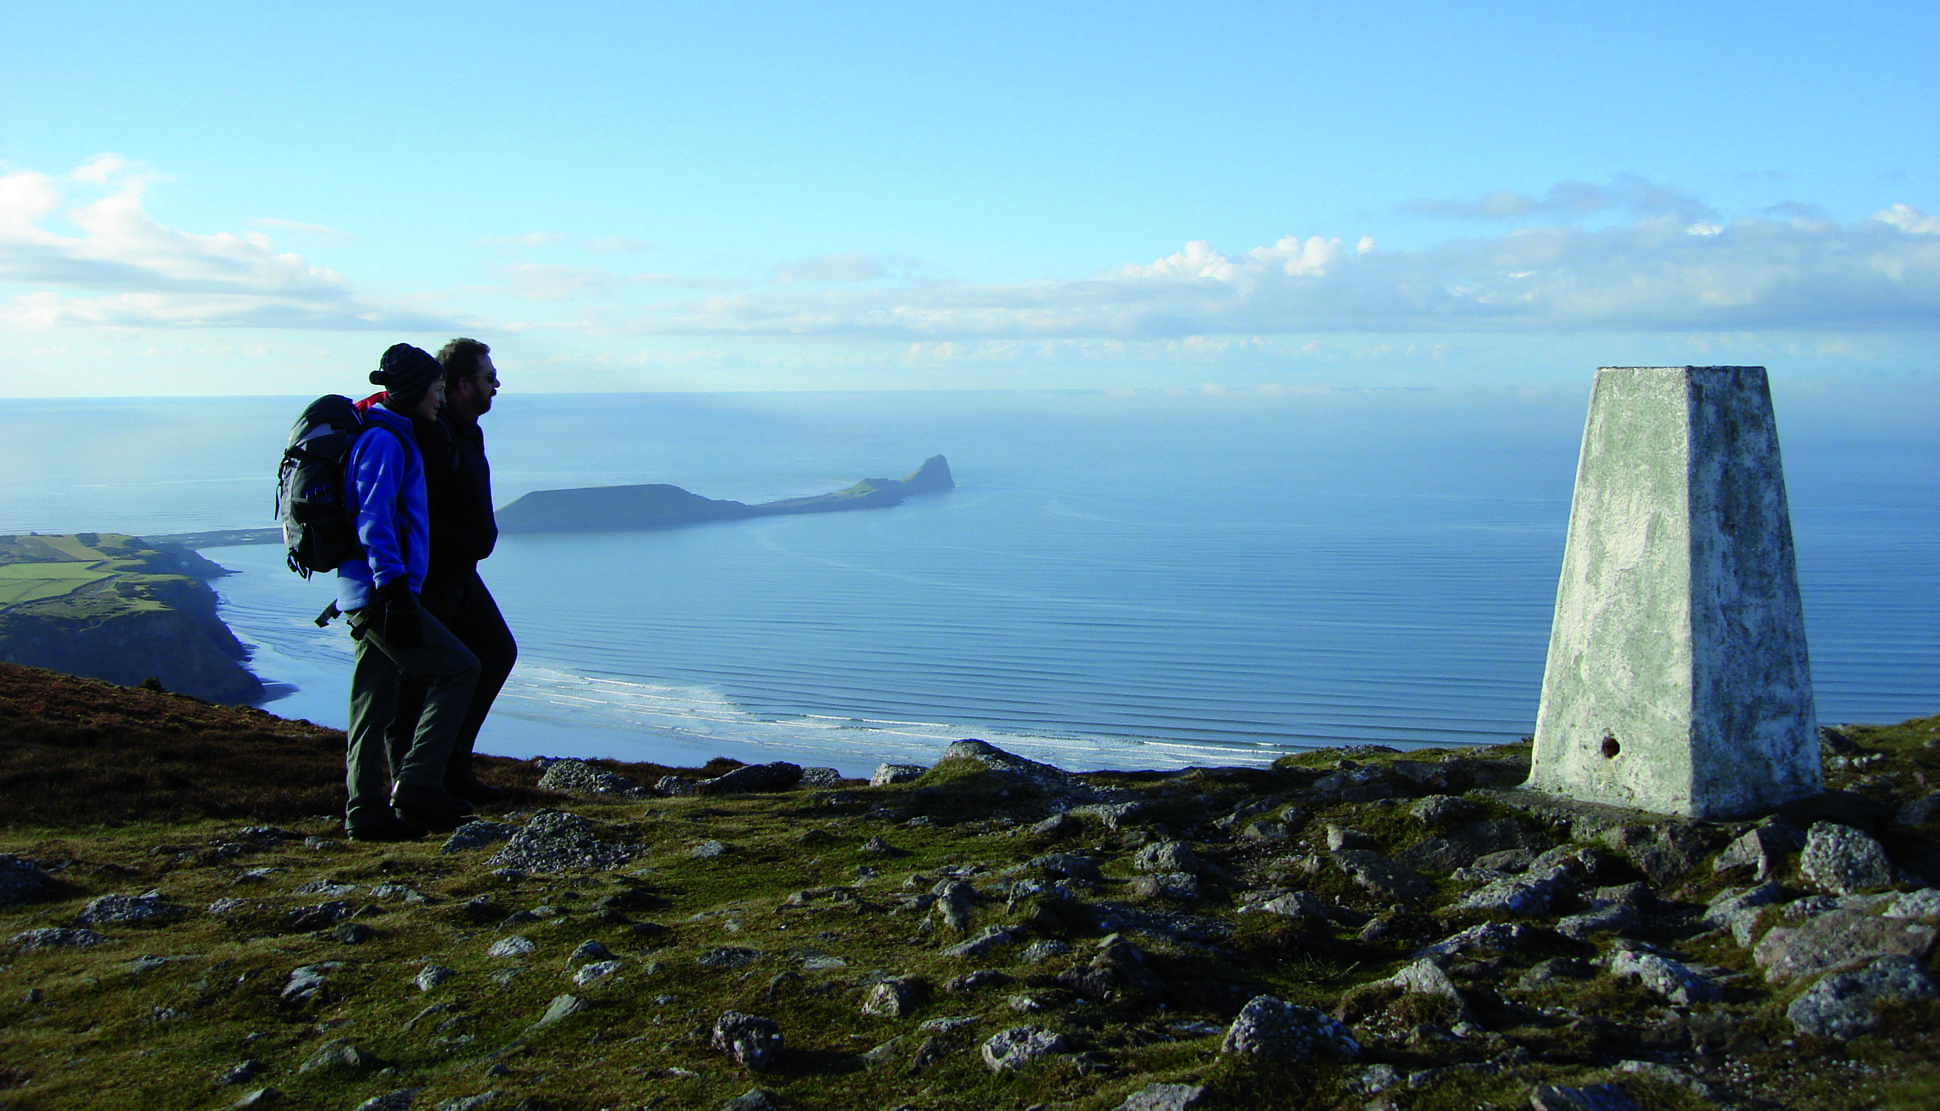 Walkers at trip point overlooking Rhossili bayon the Gower Penisular